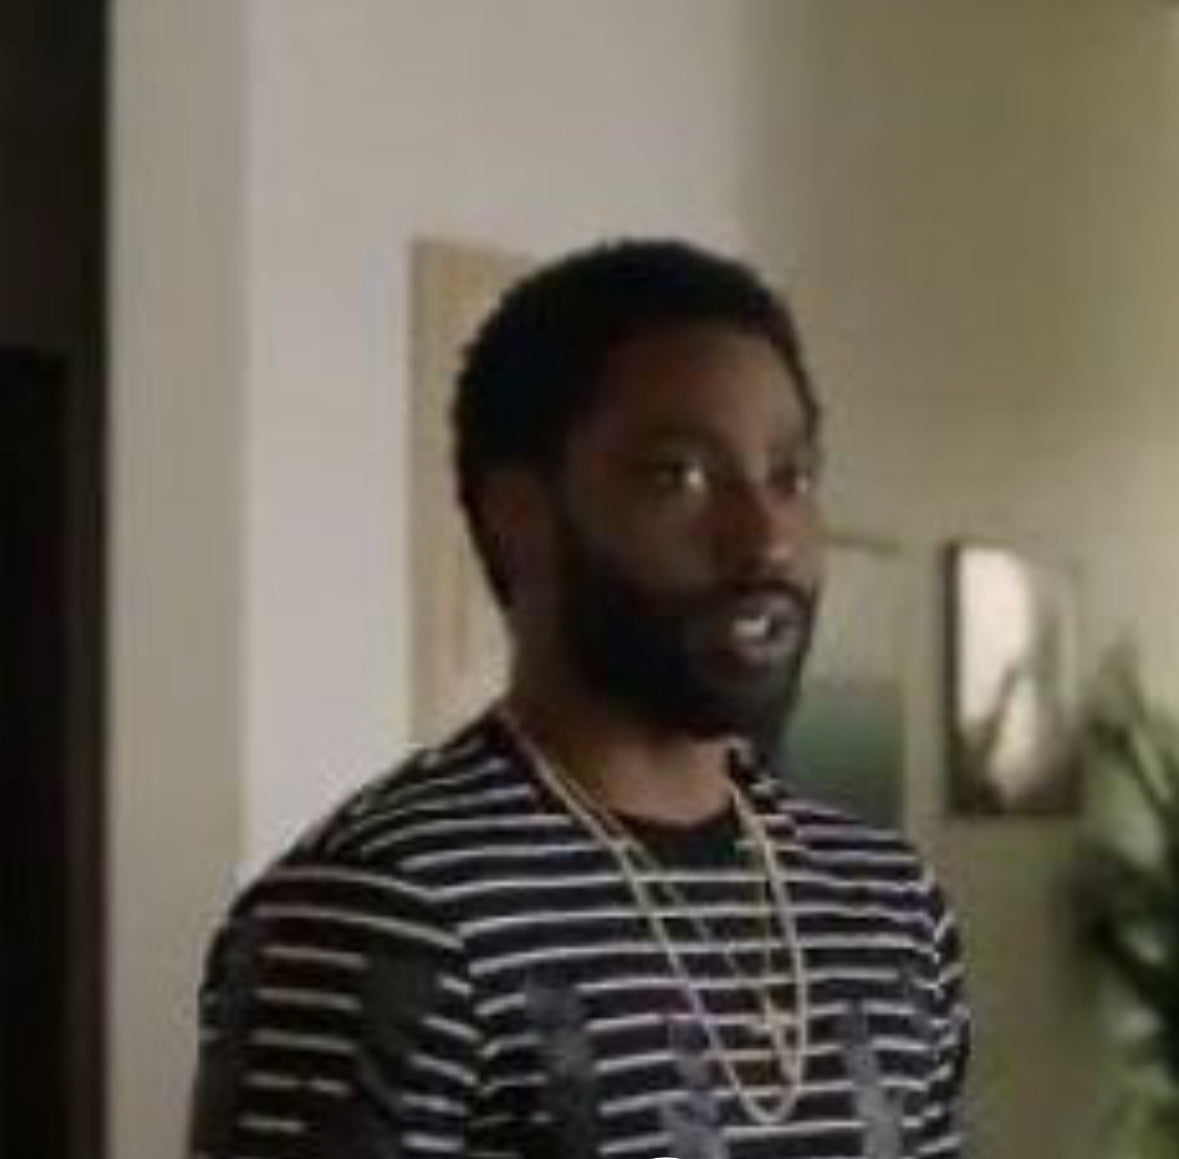 BALLERS: Ricky’s Silver Holy Cross Necklace